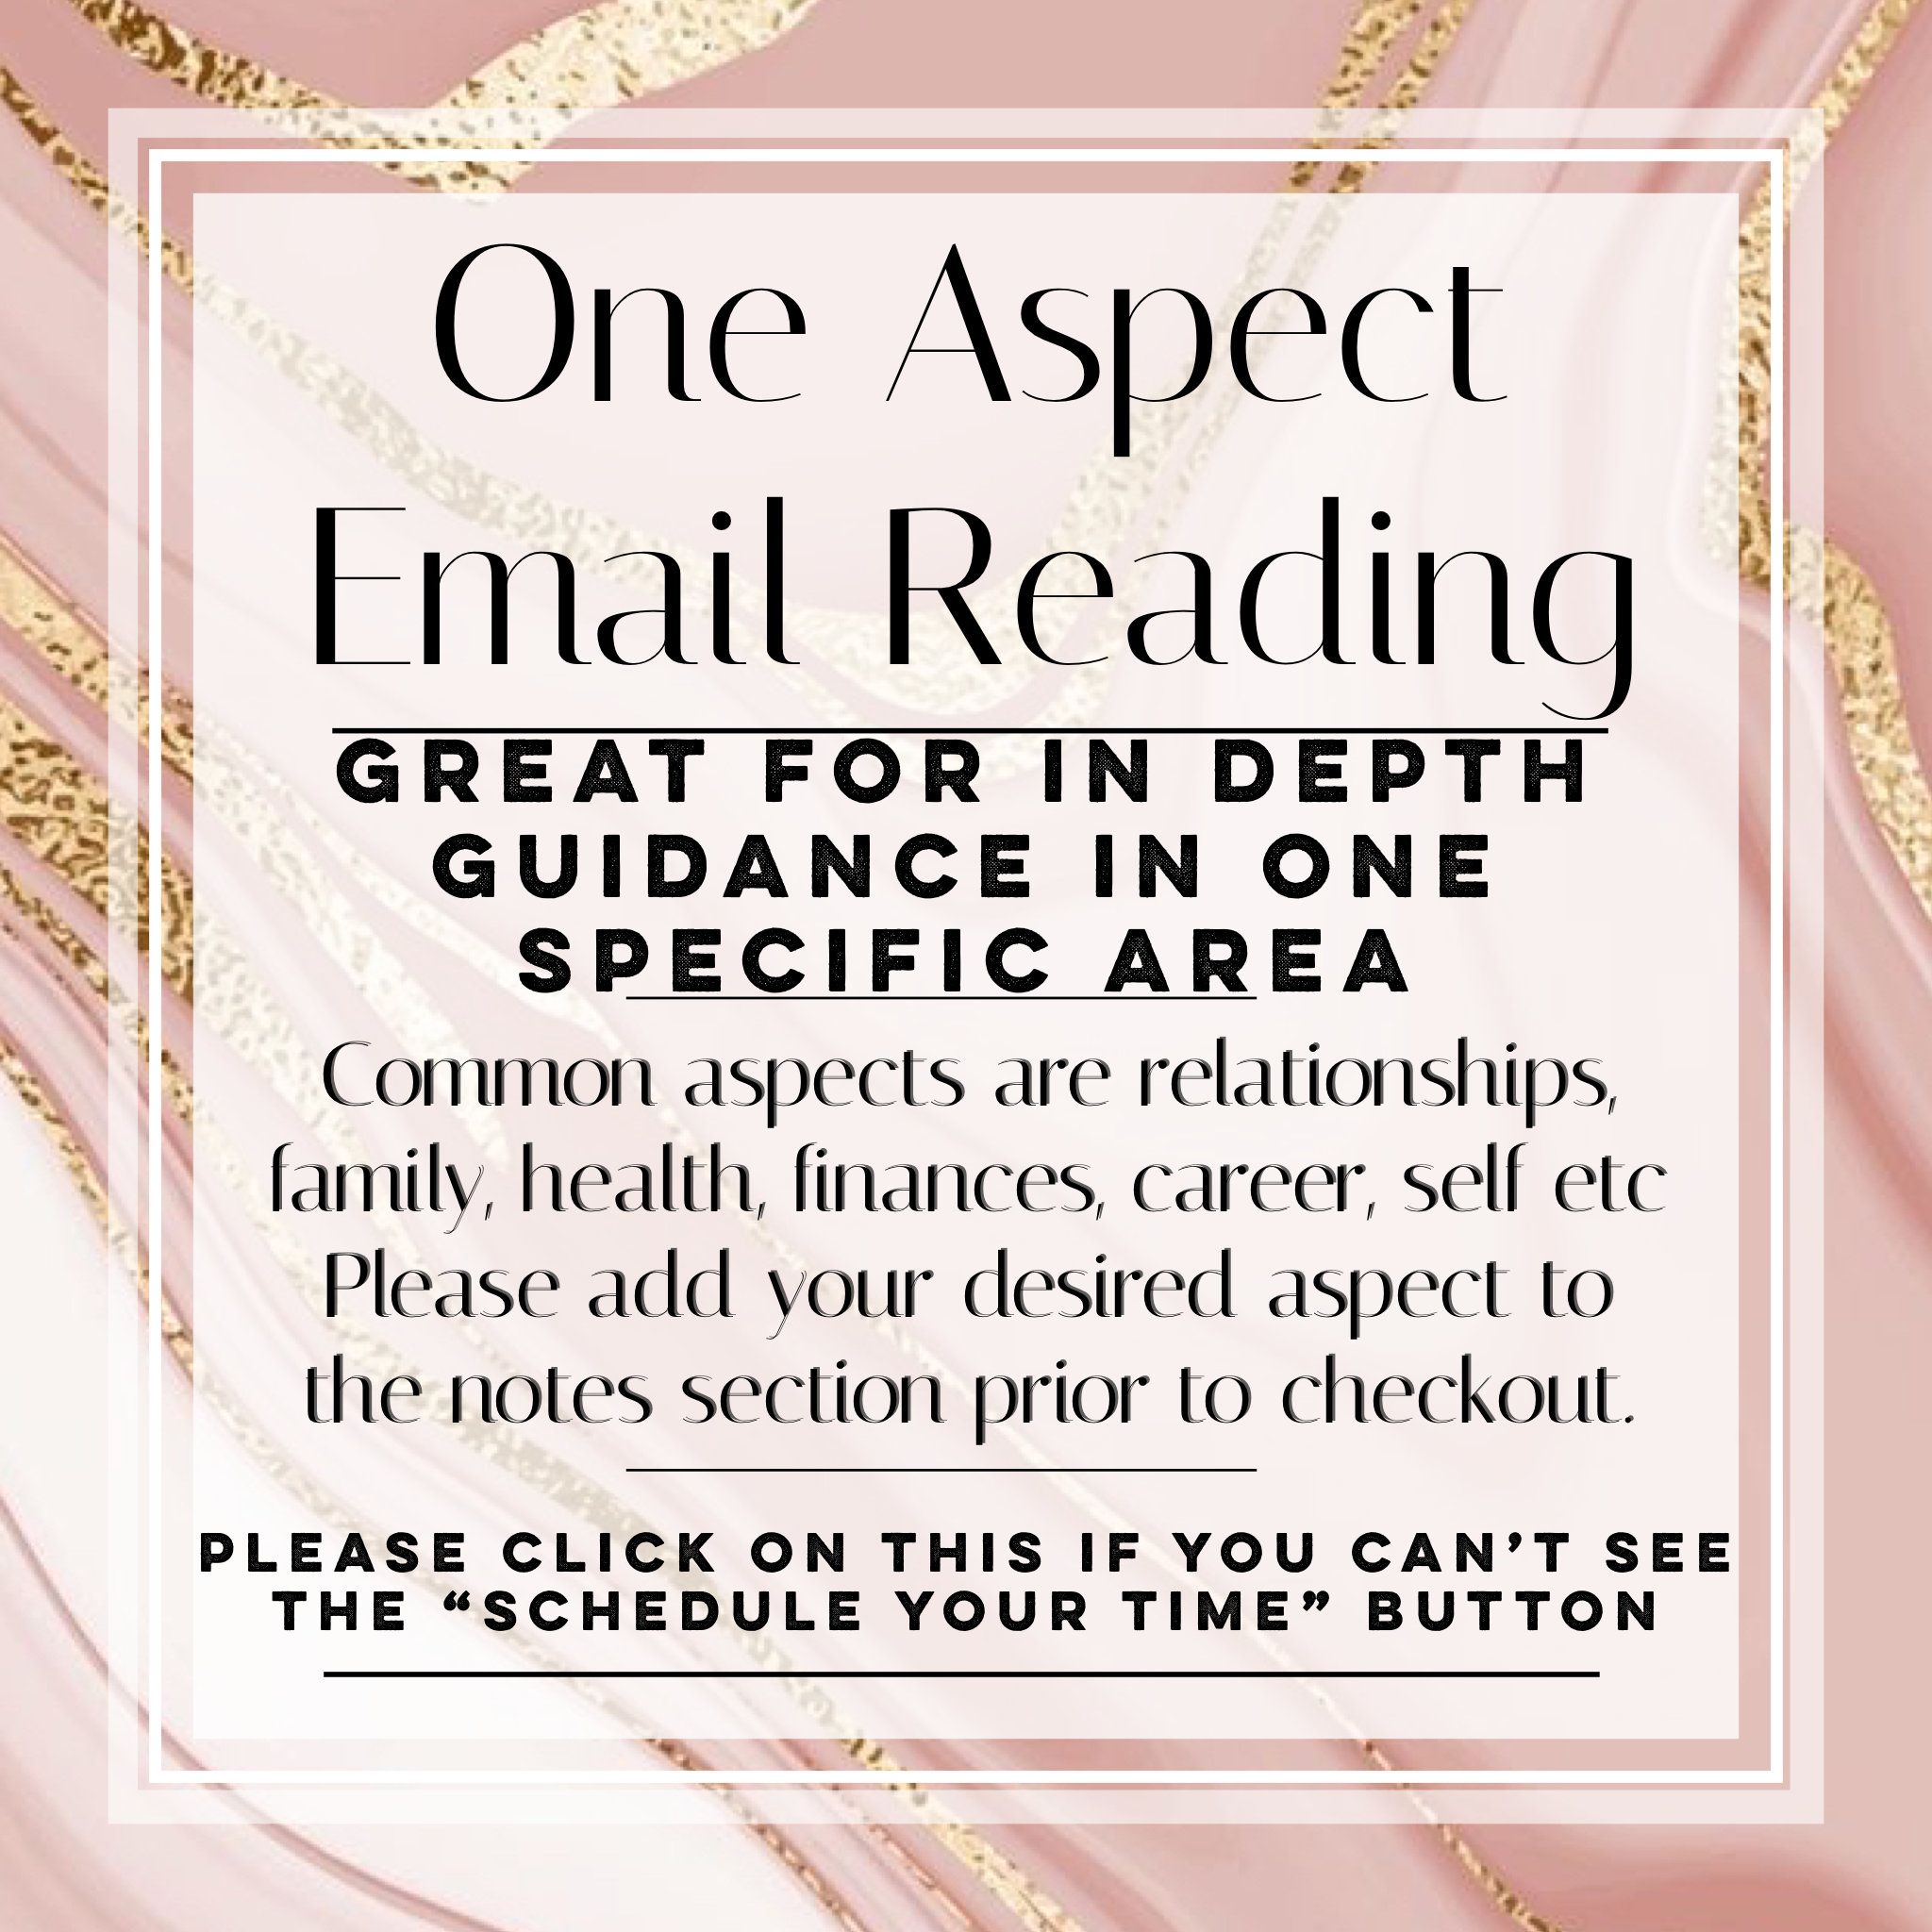 One Aspect Psychic Reading- Email